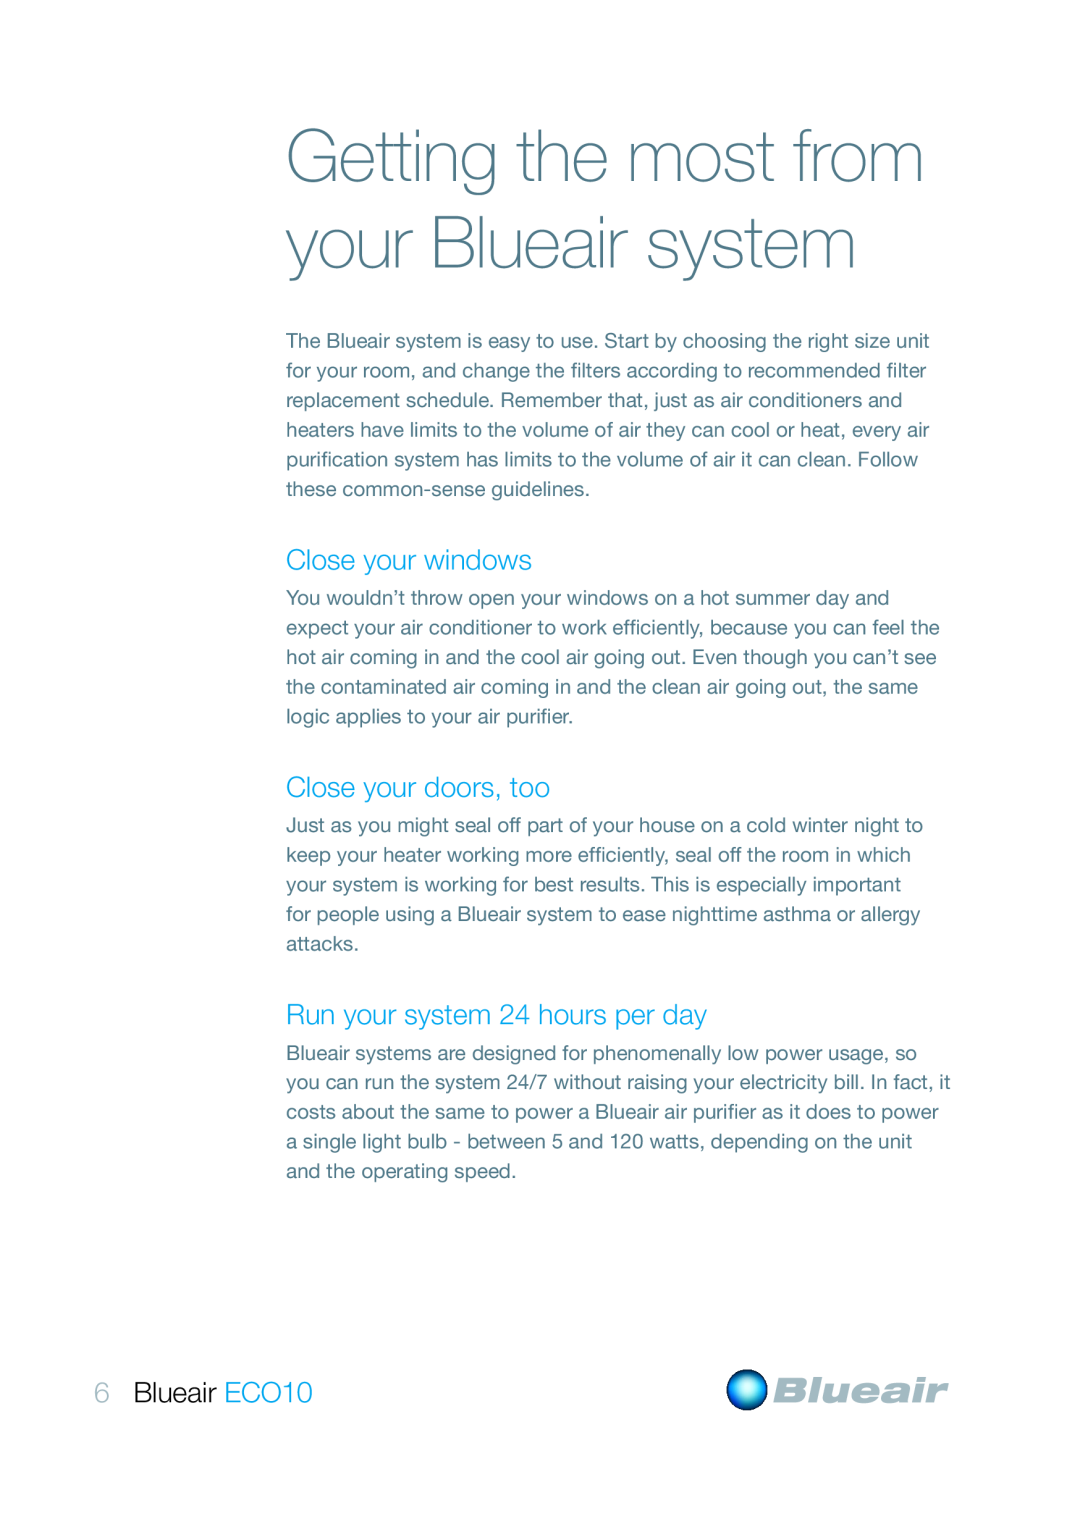 Blueair user manual Close your windows, Close your doors, too, Run your system 24 hours per day, 6Blueair ECO10 